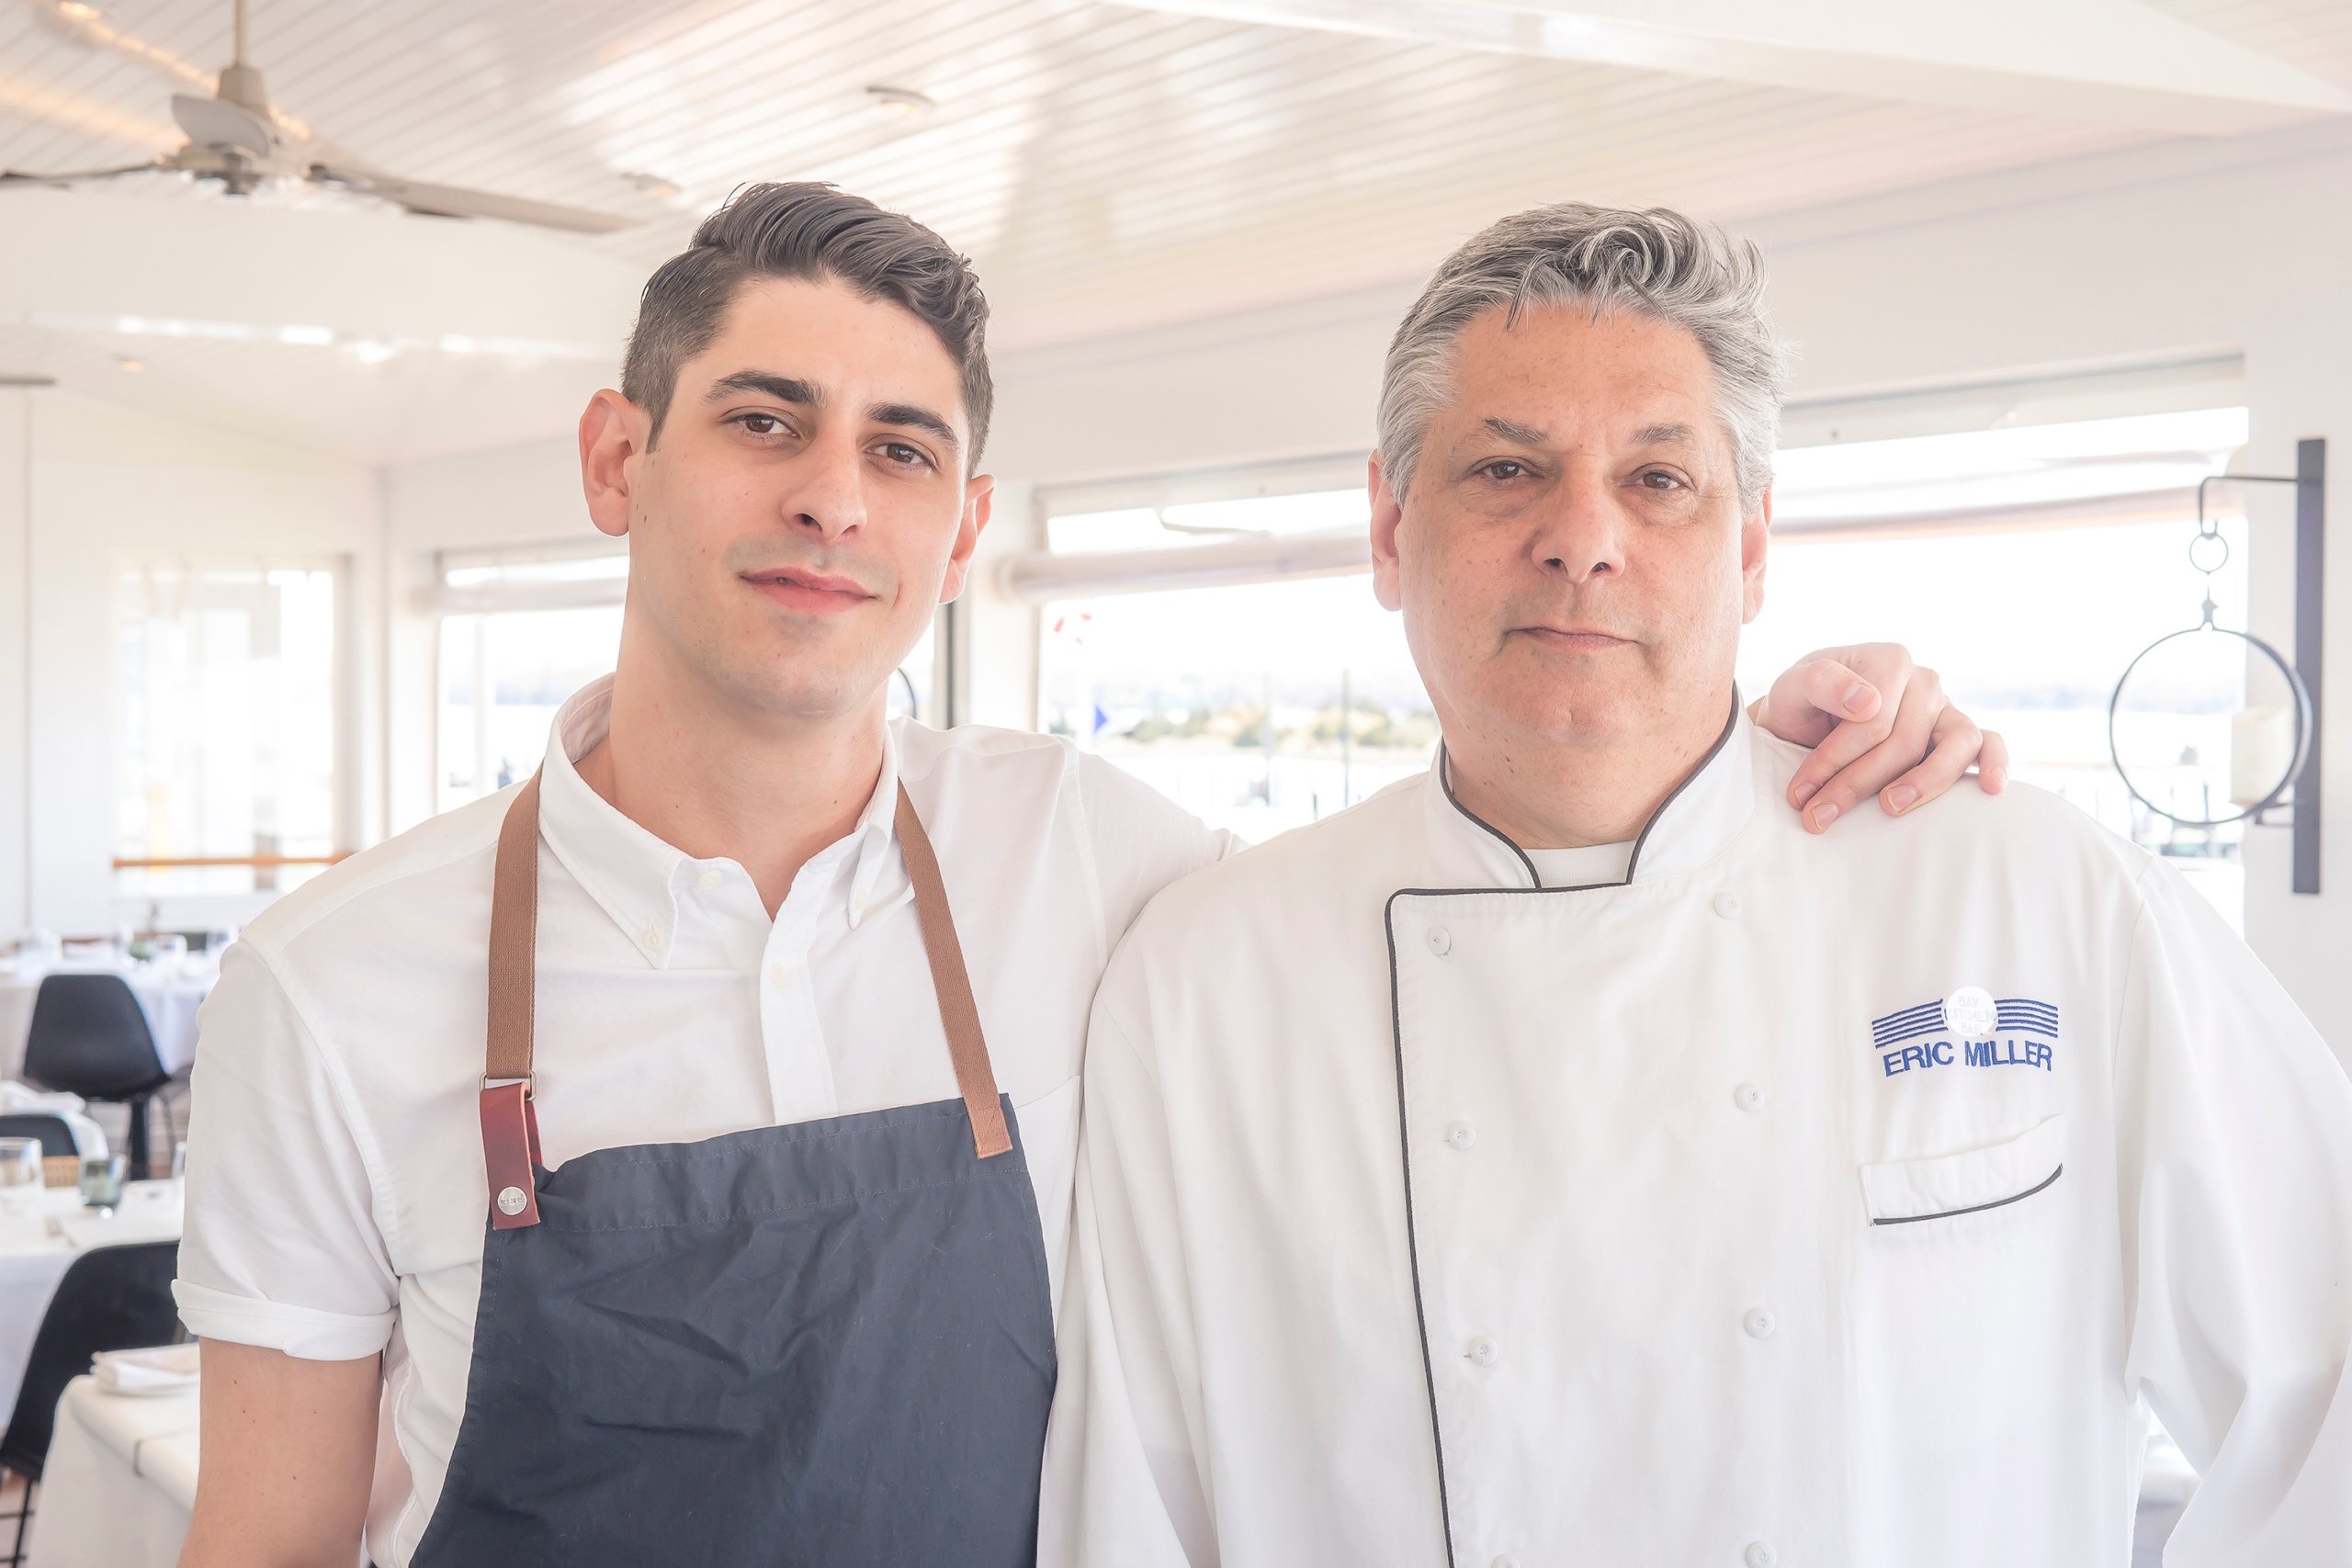 Chef Eric Miller with his son, Chef Adam Miller, at Rita Cantina.